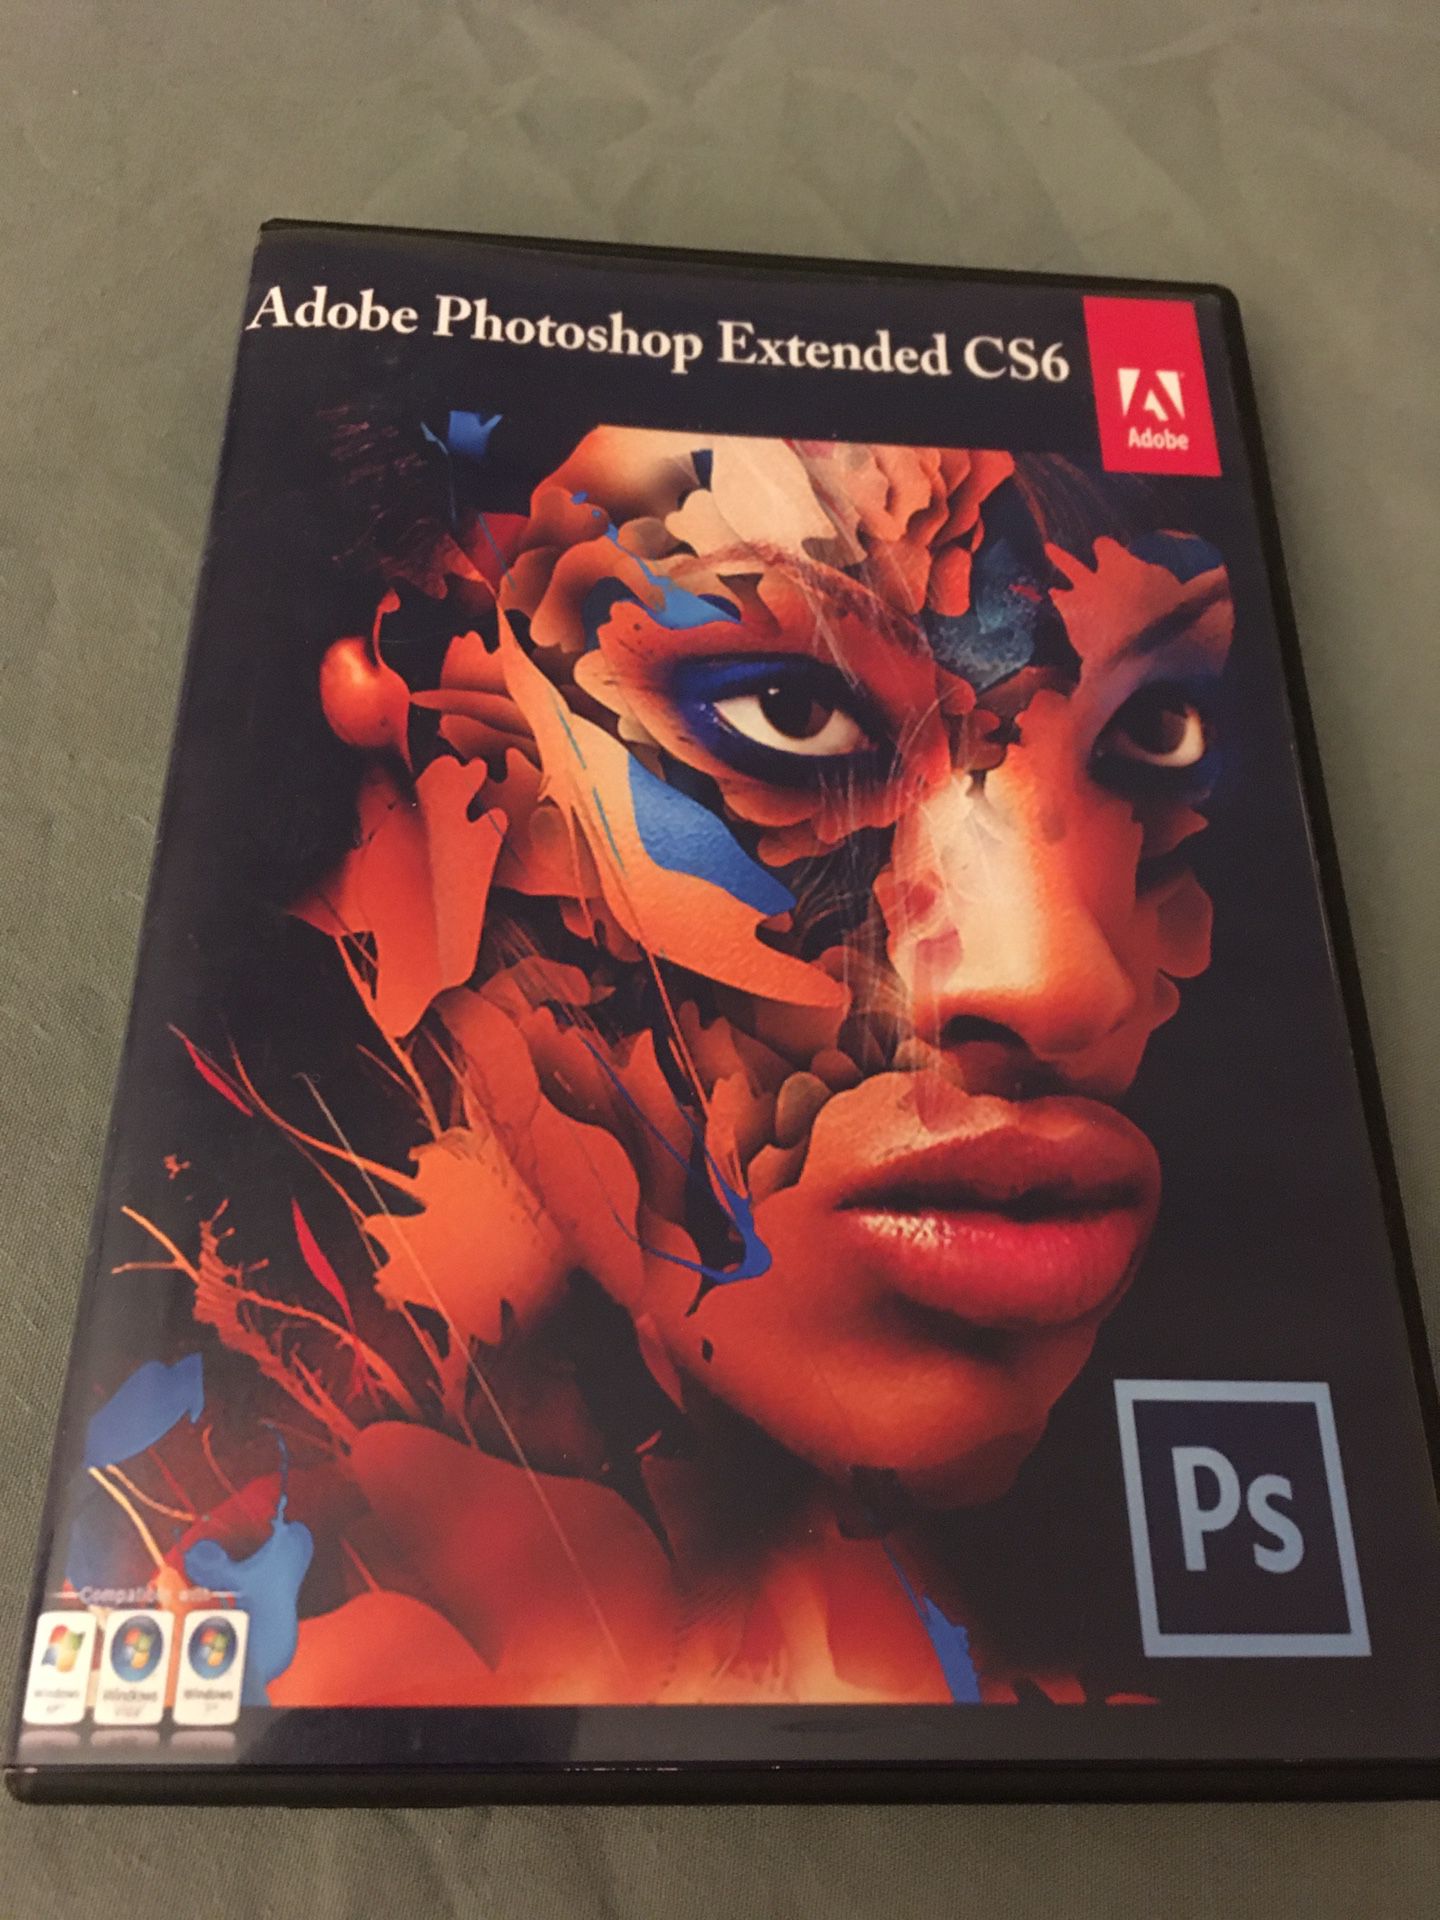 Adobe Photoshop CS6 Extended for Windows, DVD disc installation